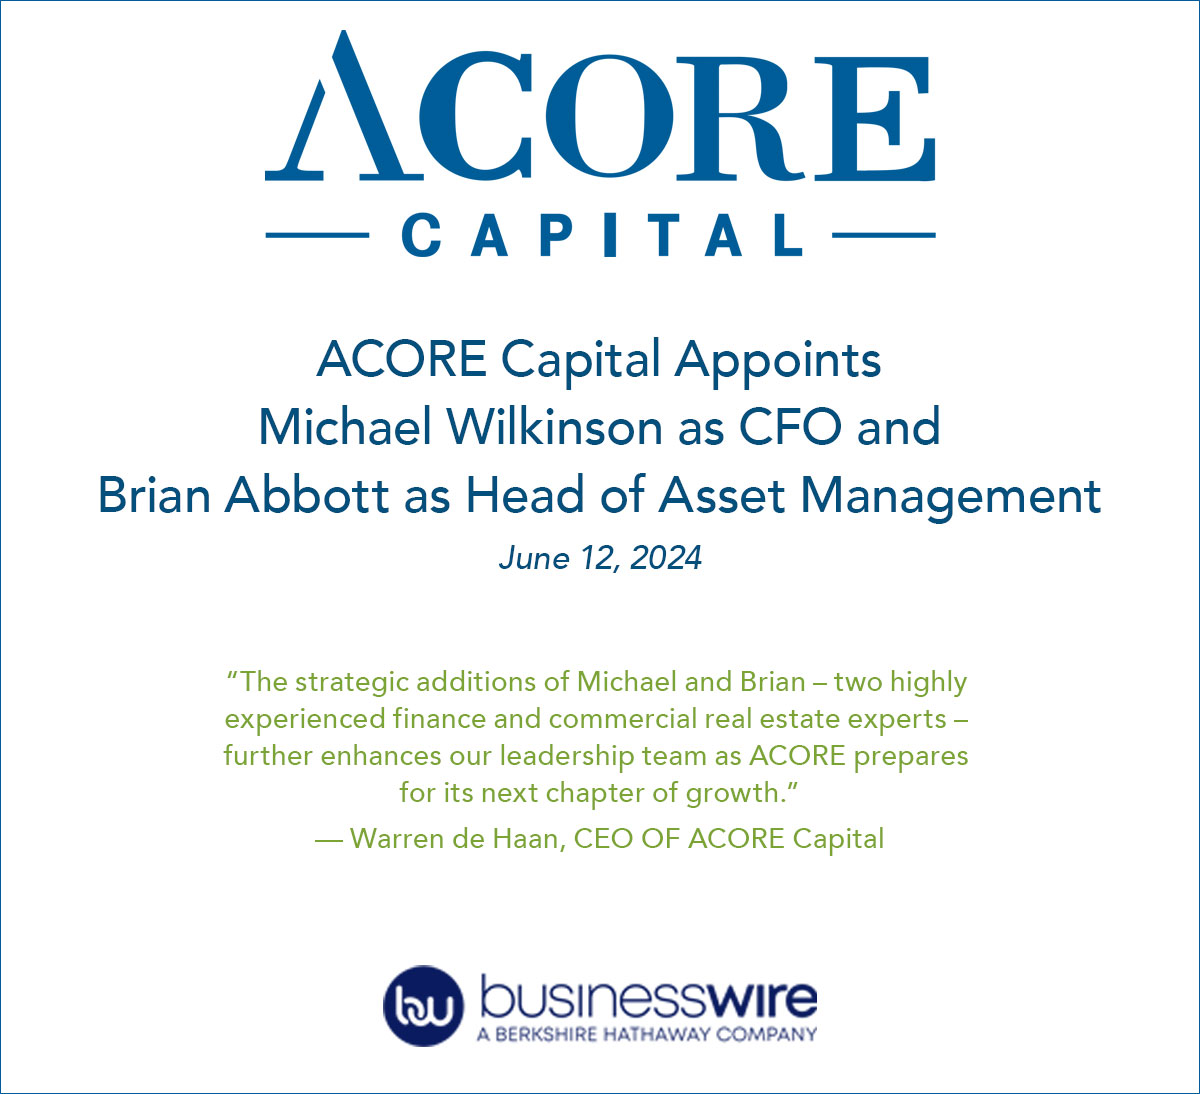 ACORE Capital Appoints Michael Wilkinson as CFO and Brian Abbott as Head of Asset Management